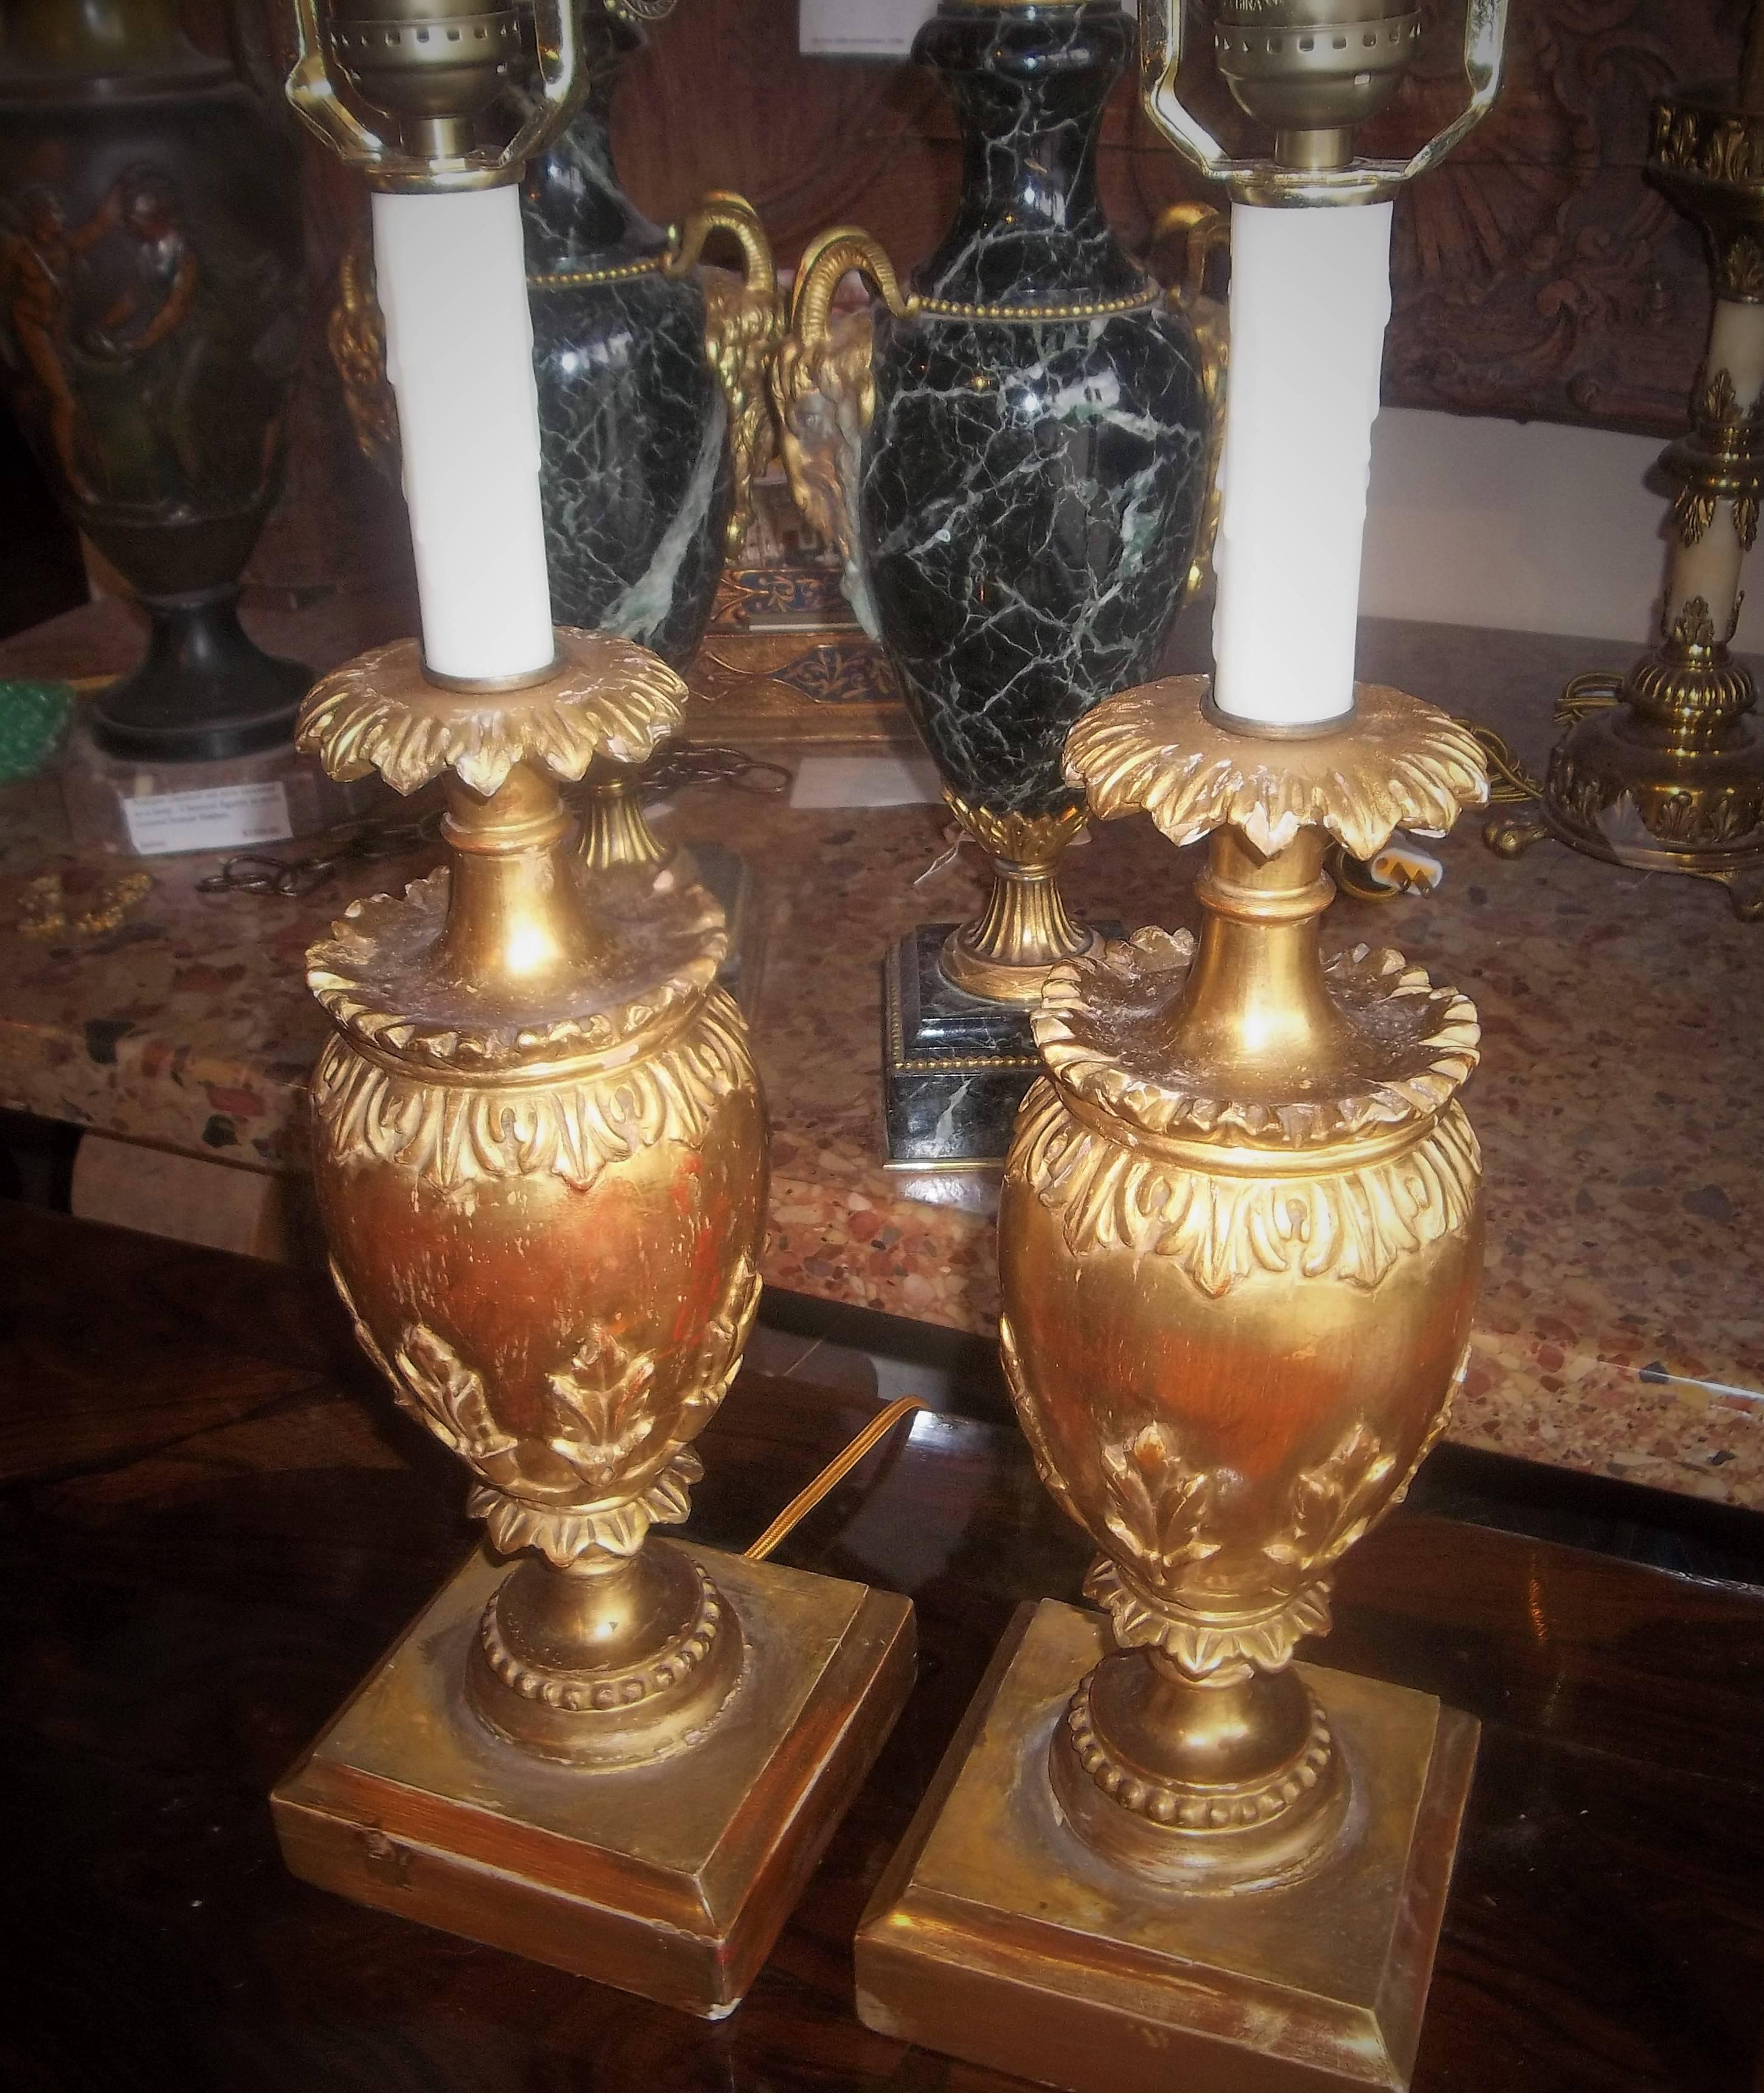 Probably early 20th century and originally as garniture vases. Pretty water gilding with red bole bleeding and chipping throughout. Probably older touch ups.
Lamp wiring can be undone to return as garnitures. 

Measure: Overall lamp height 19.5